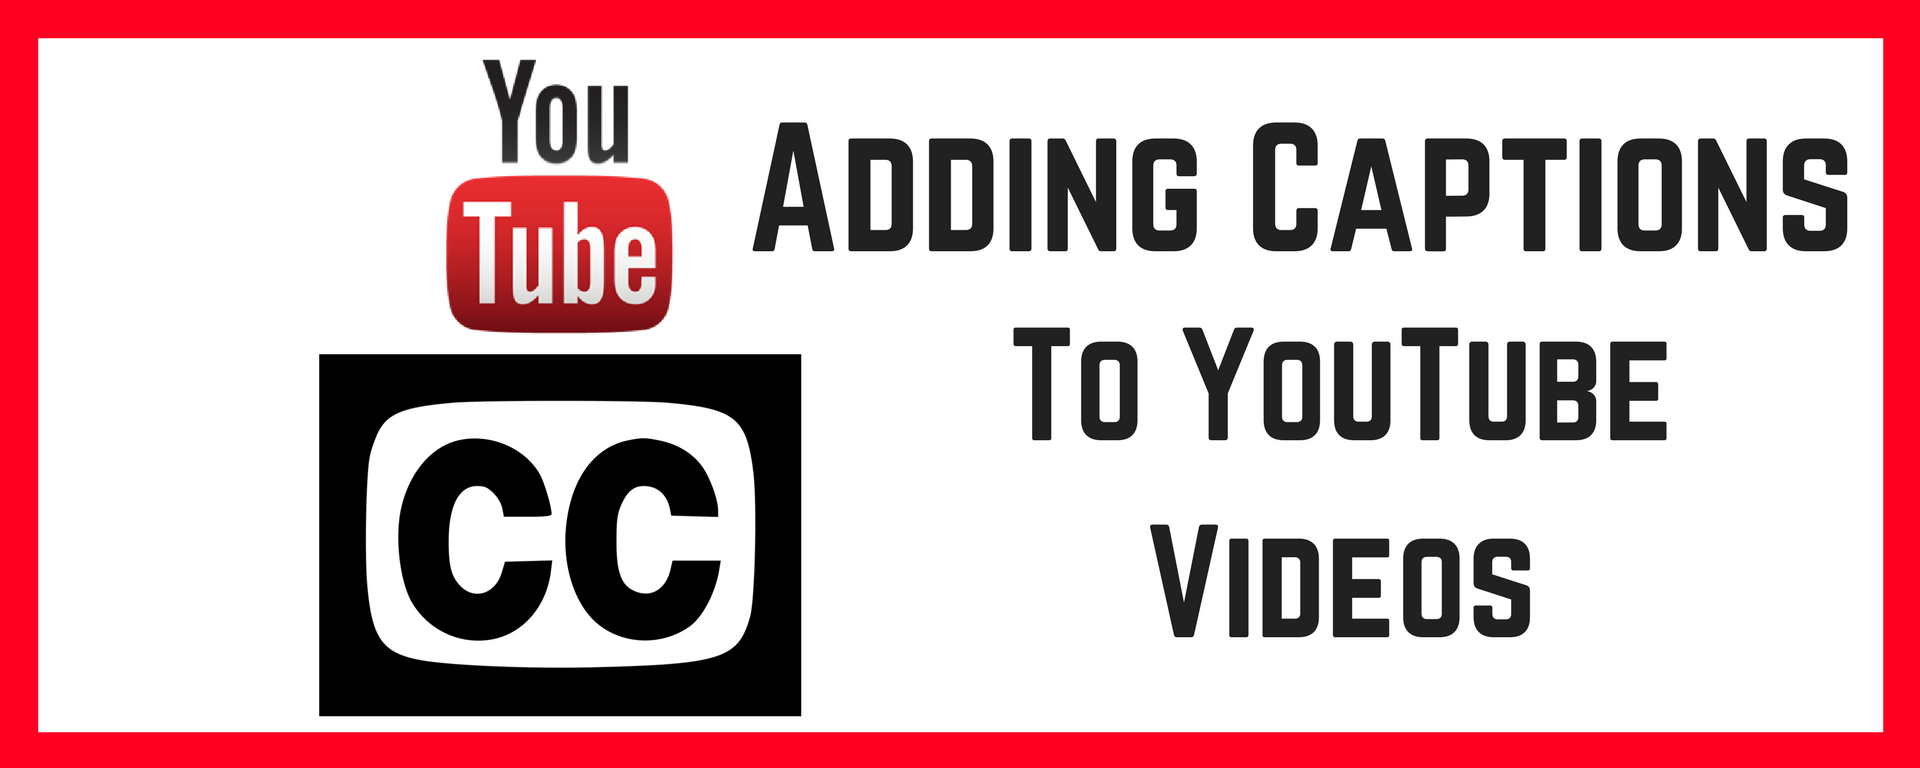 Adding caption to YouTube Videos with YouTube logo on top on closed caption symbol